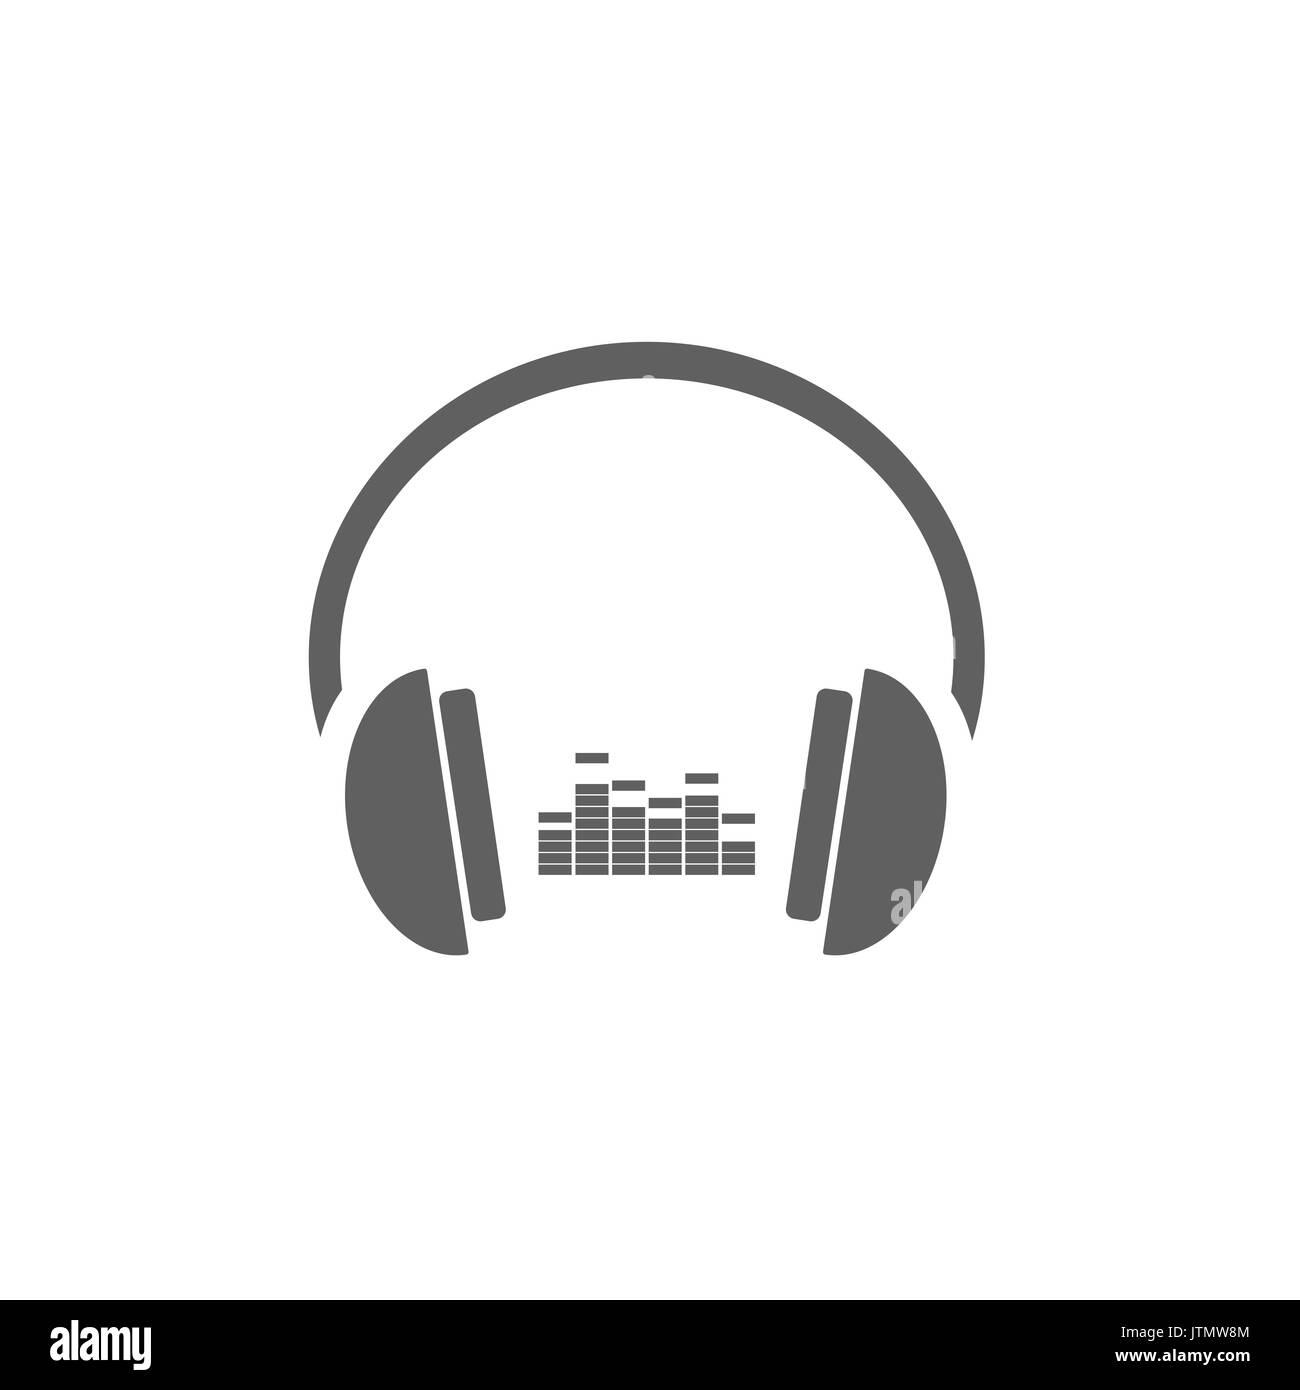 Headphones with music icon on white background Stock Vector